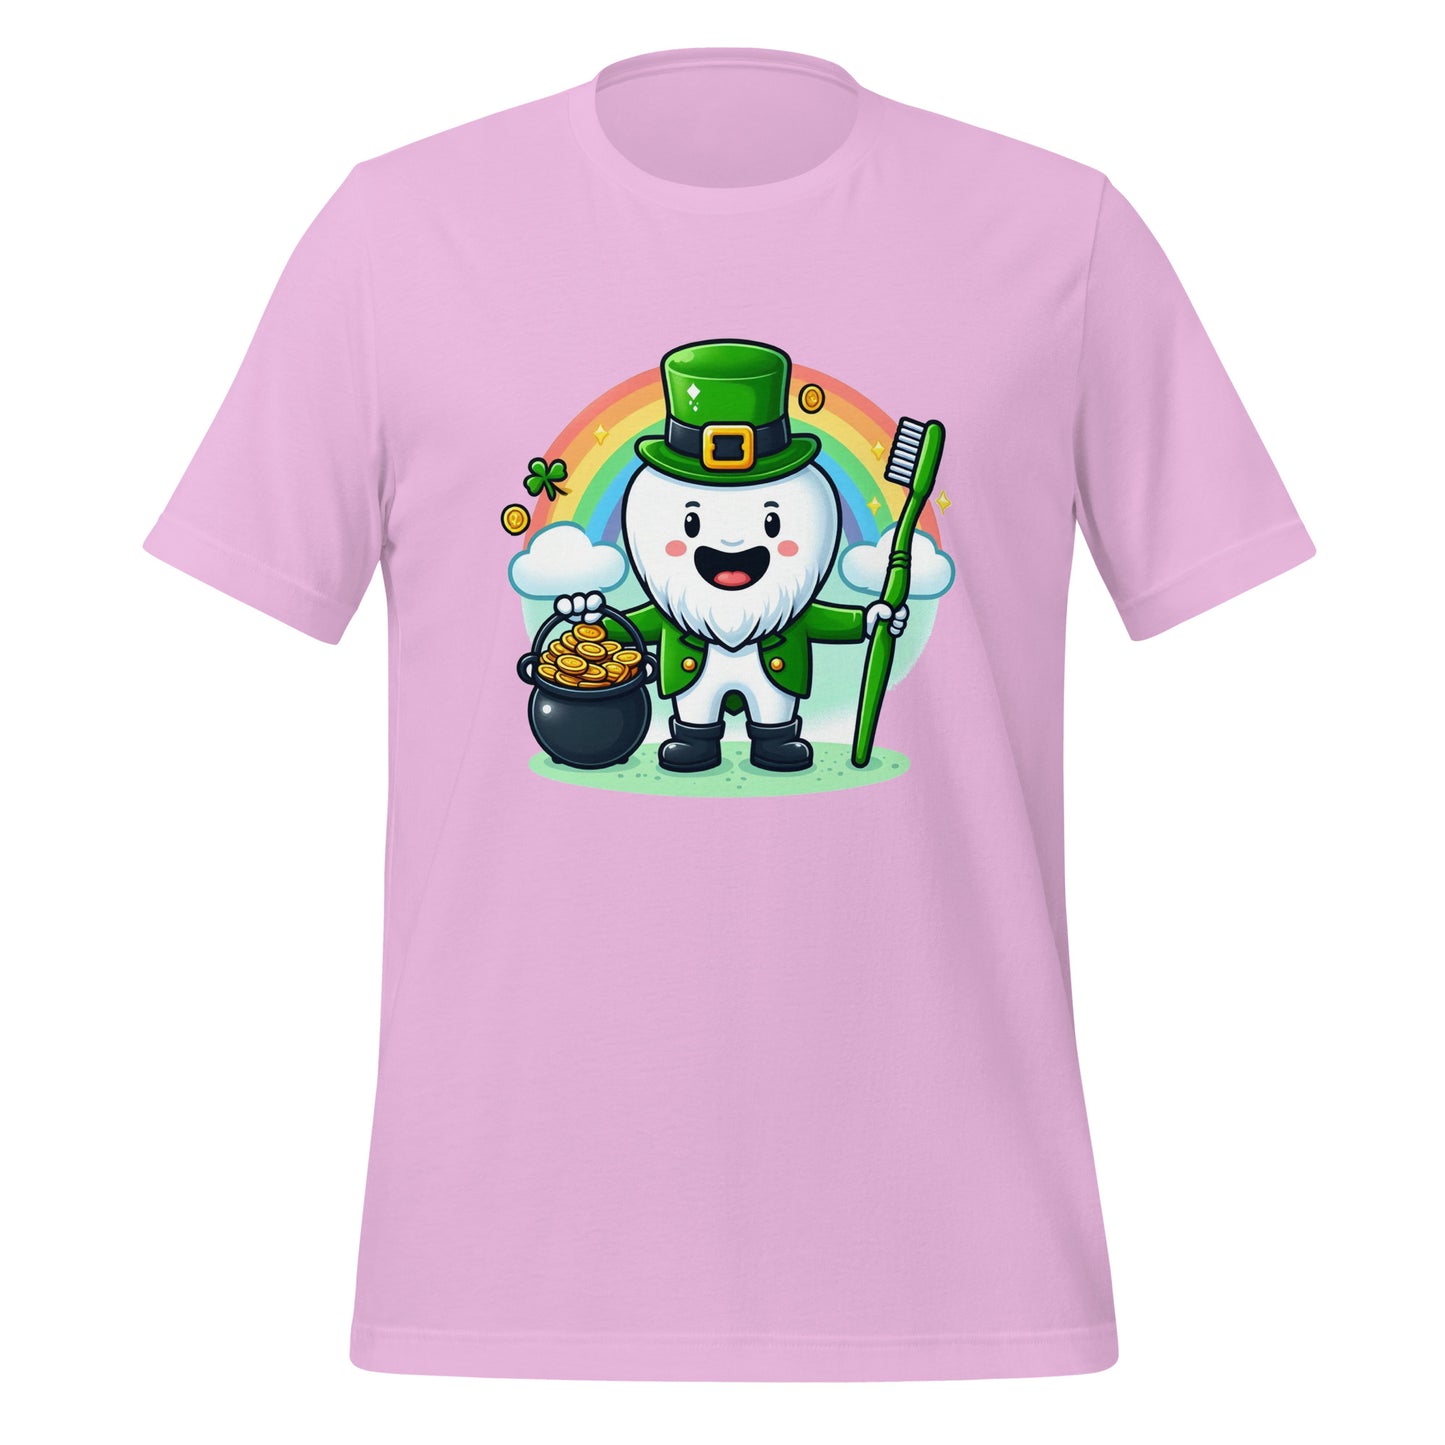 Leprechaun Tooth T-Shirt: A Fun, St. Patrick’s Day-Inspired Design for Dental Fan